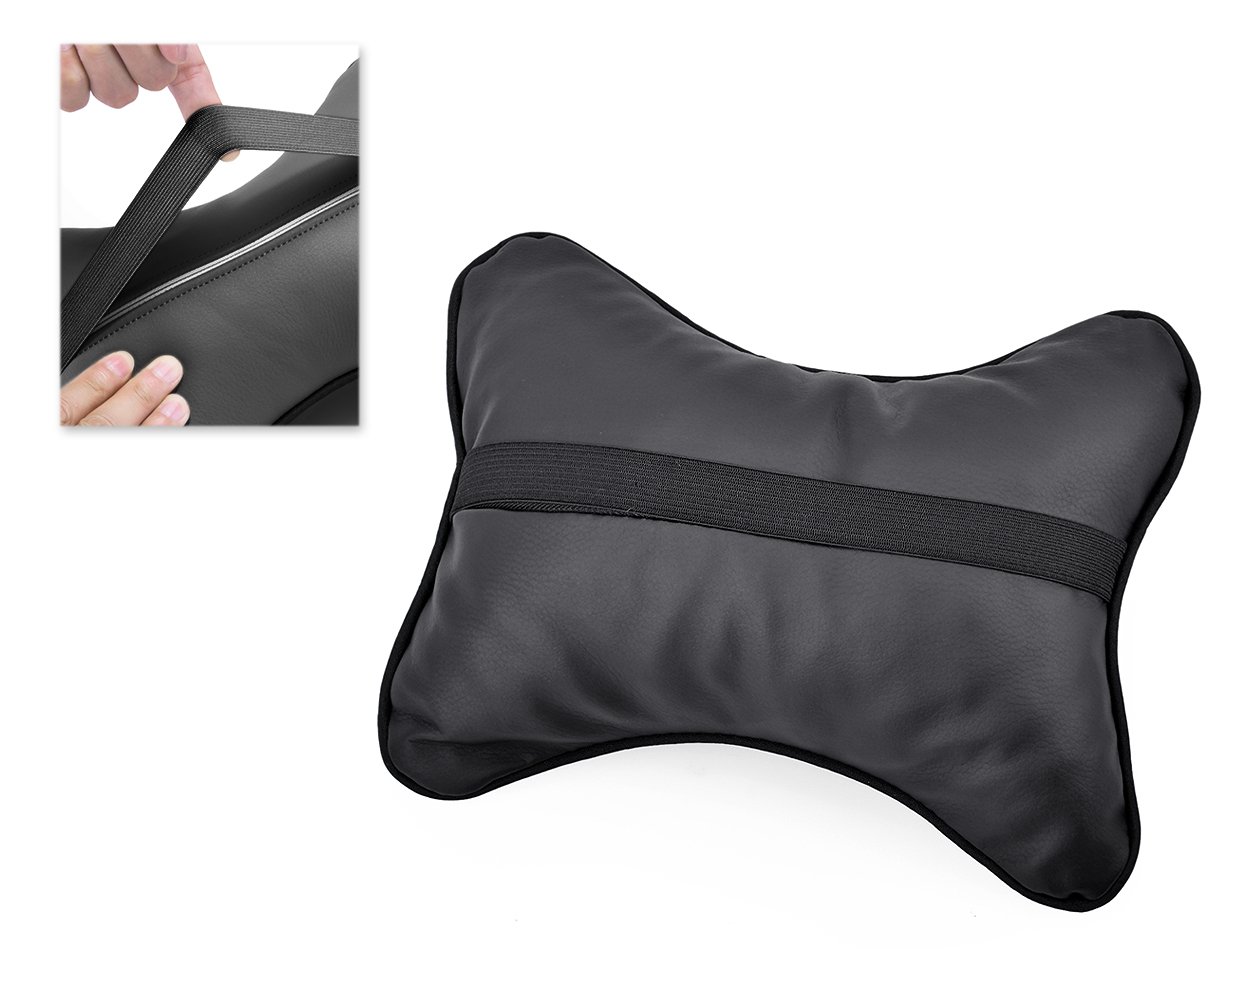 Black Ace Select Car Neck Pillow 2 Pieces PU Leather Travel Pillow for Head Rest  Neck Support for Car Seat Bedding & Linen Home urbytus.com